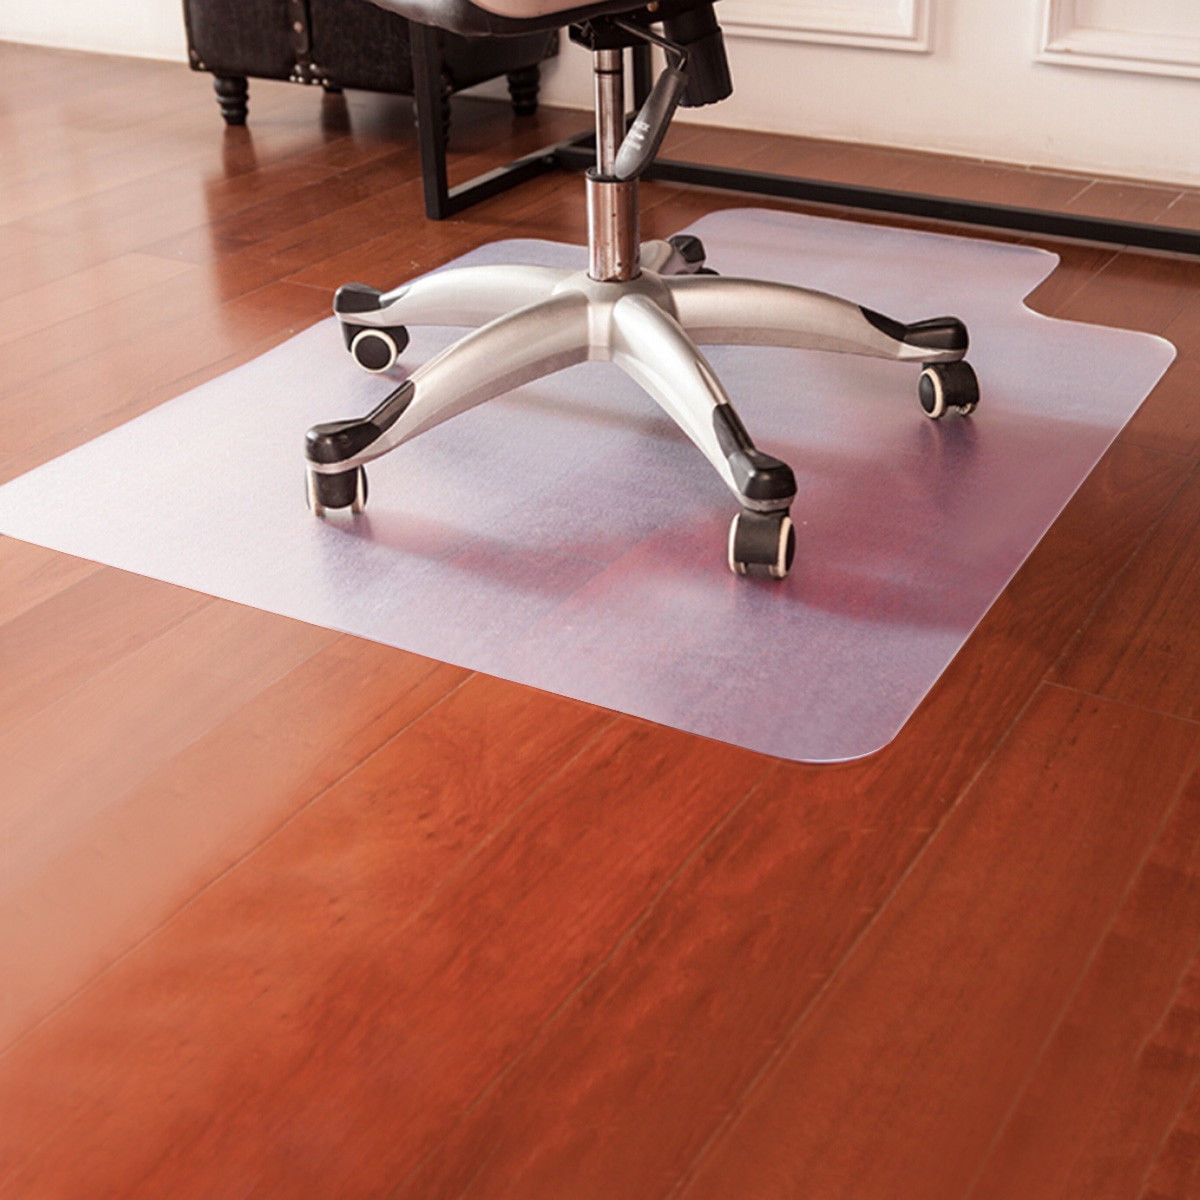 Eurotex Office Chair Mat- Office Desk Chair Mat for Hardwood Floors Multi-Purpose Chair Carpet for Home 5mm Thick 48x36 Hard Floor Protector Mat Brown 